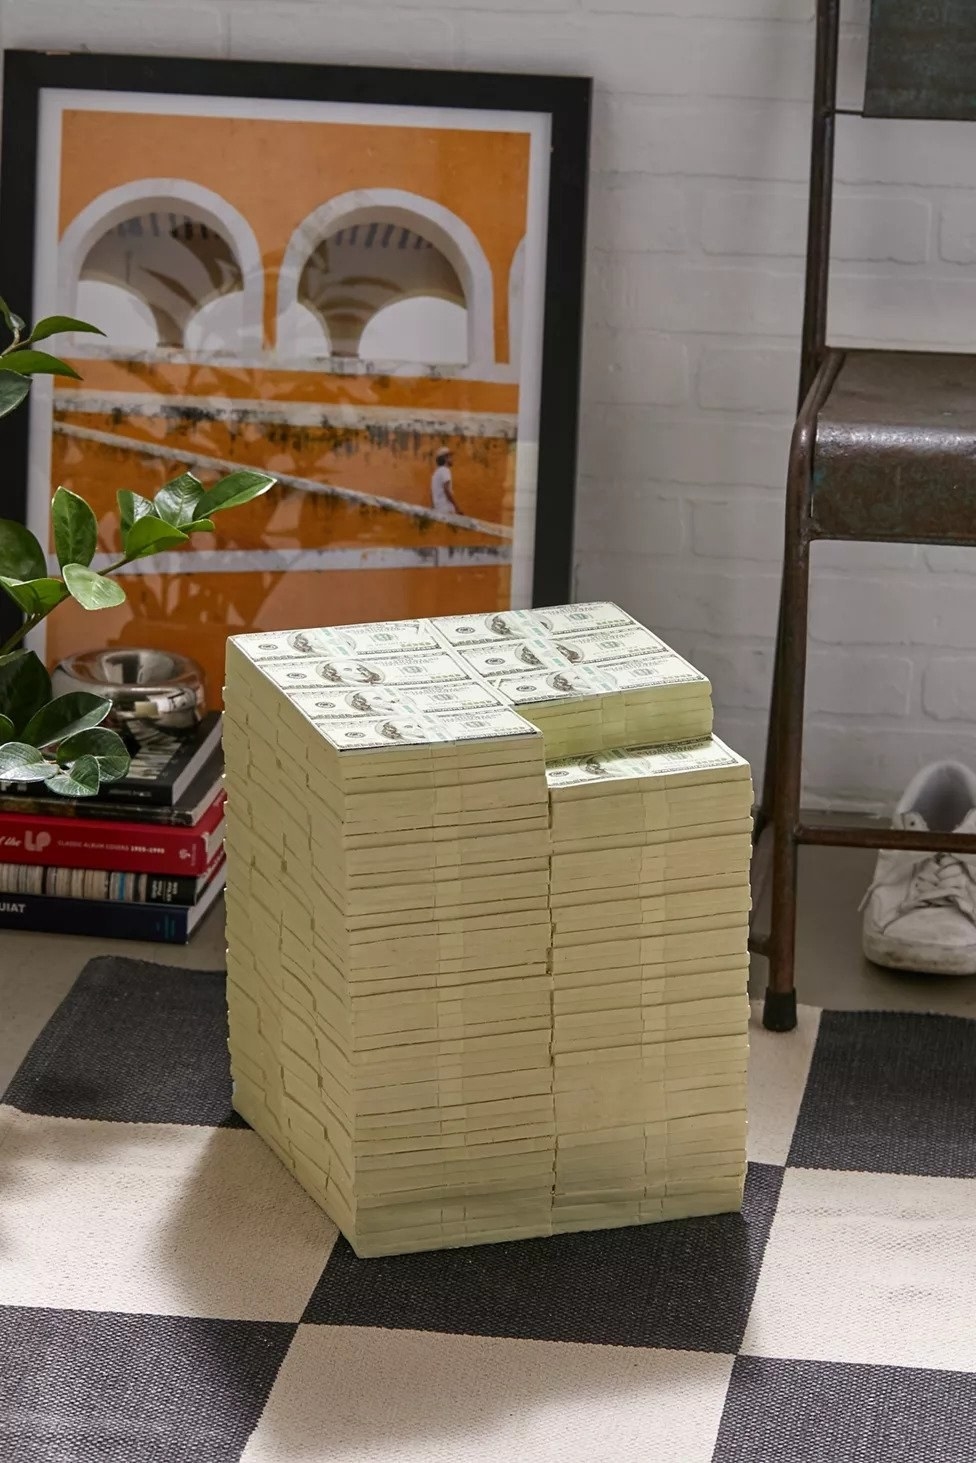 stool in the shape of realistic hundred dollar bills in a giant stack